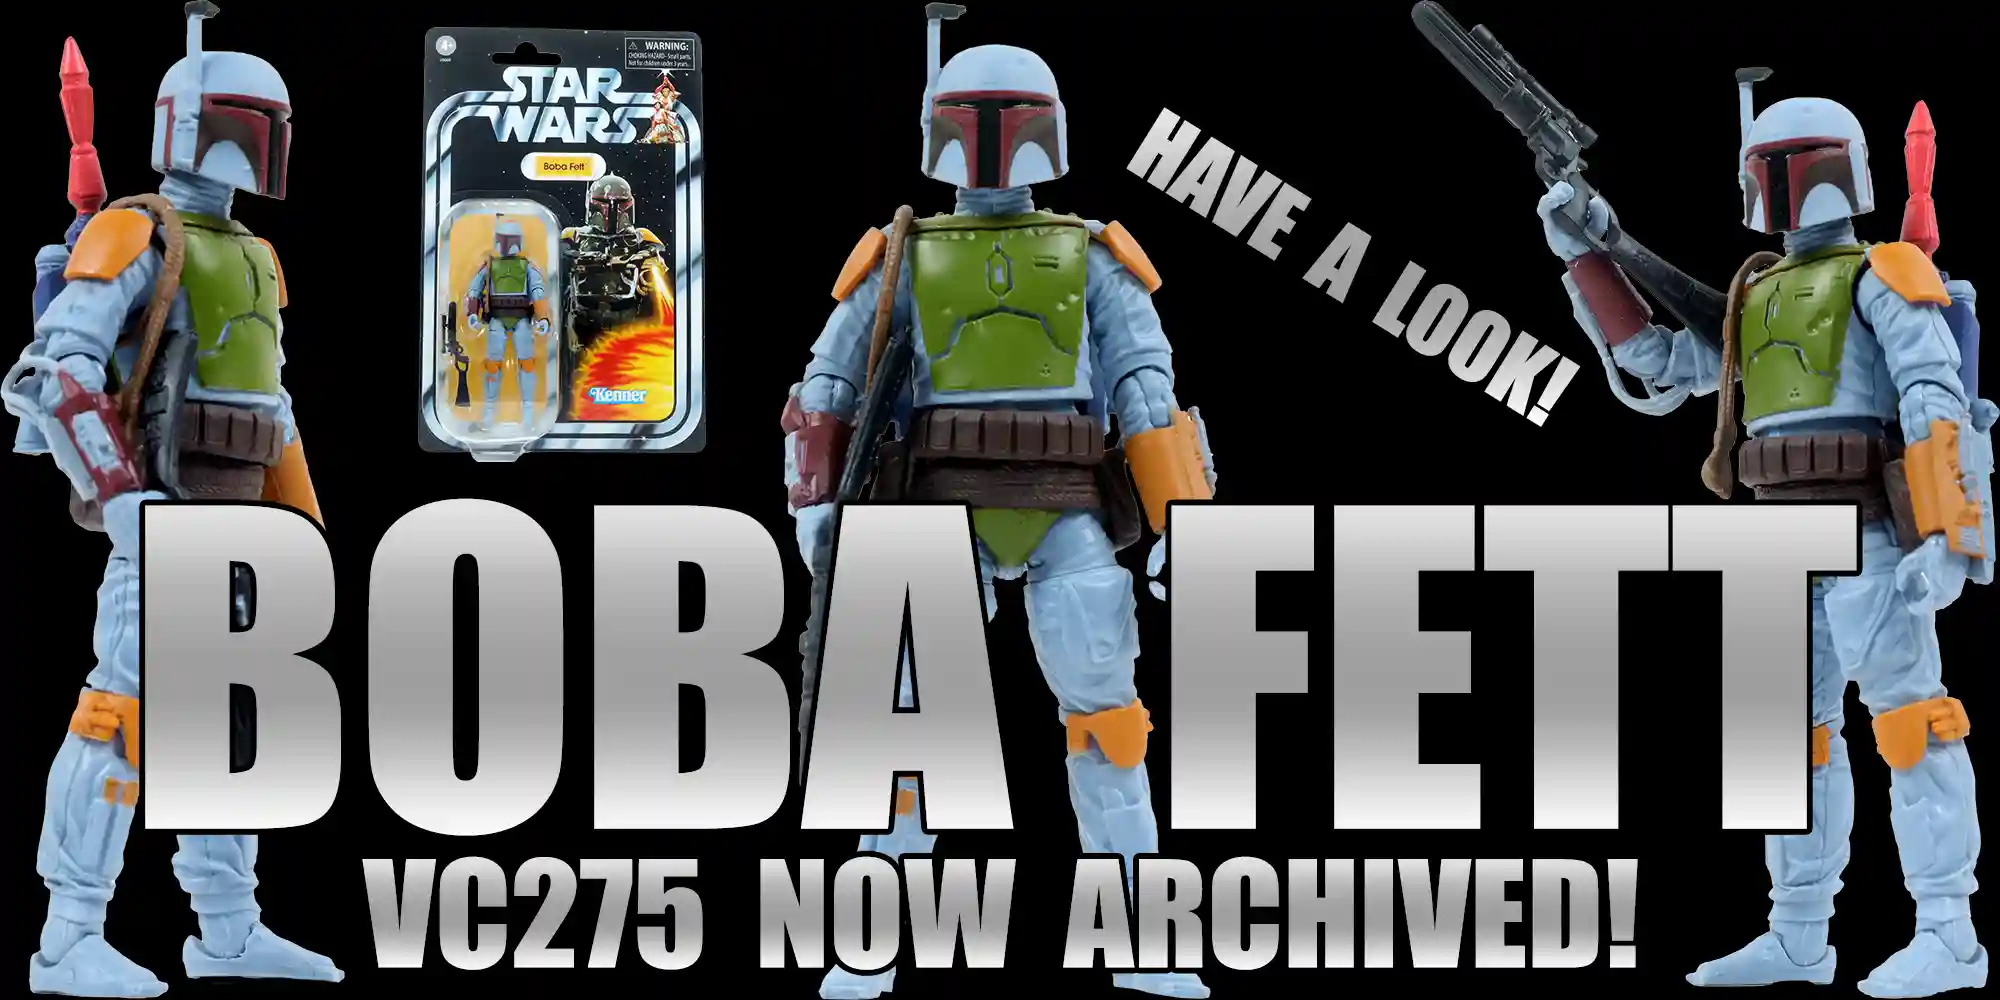 The VC275 Boba Fett Kenner Tribute Figure Is Now Archived - CHECK IT OUT!